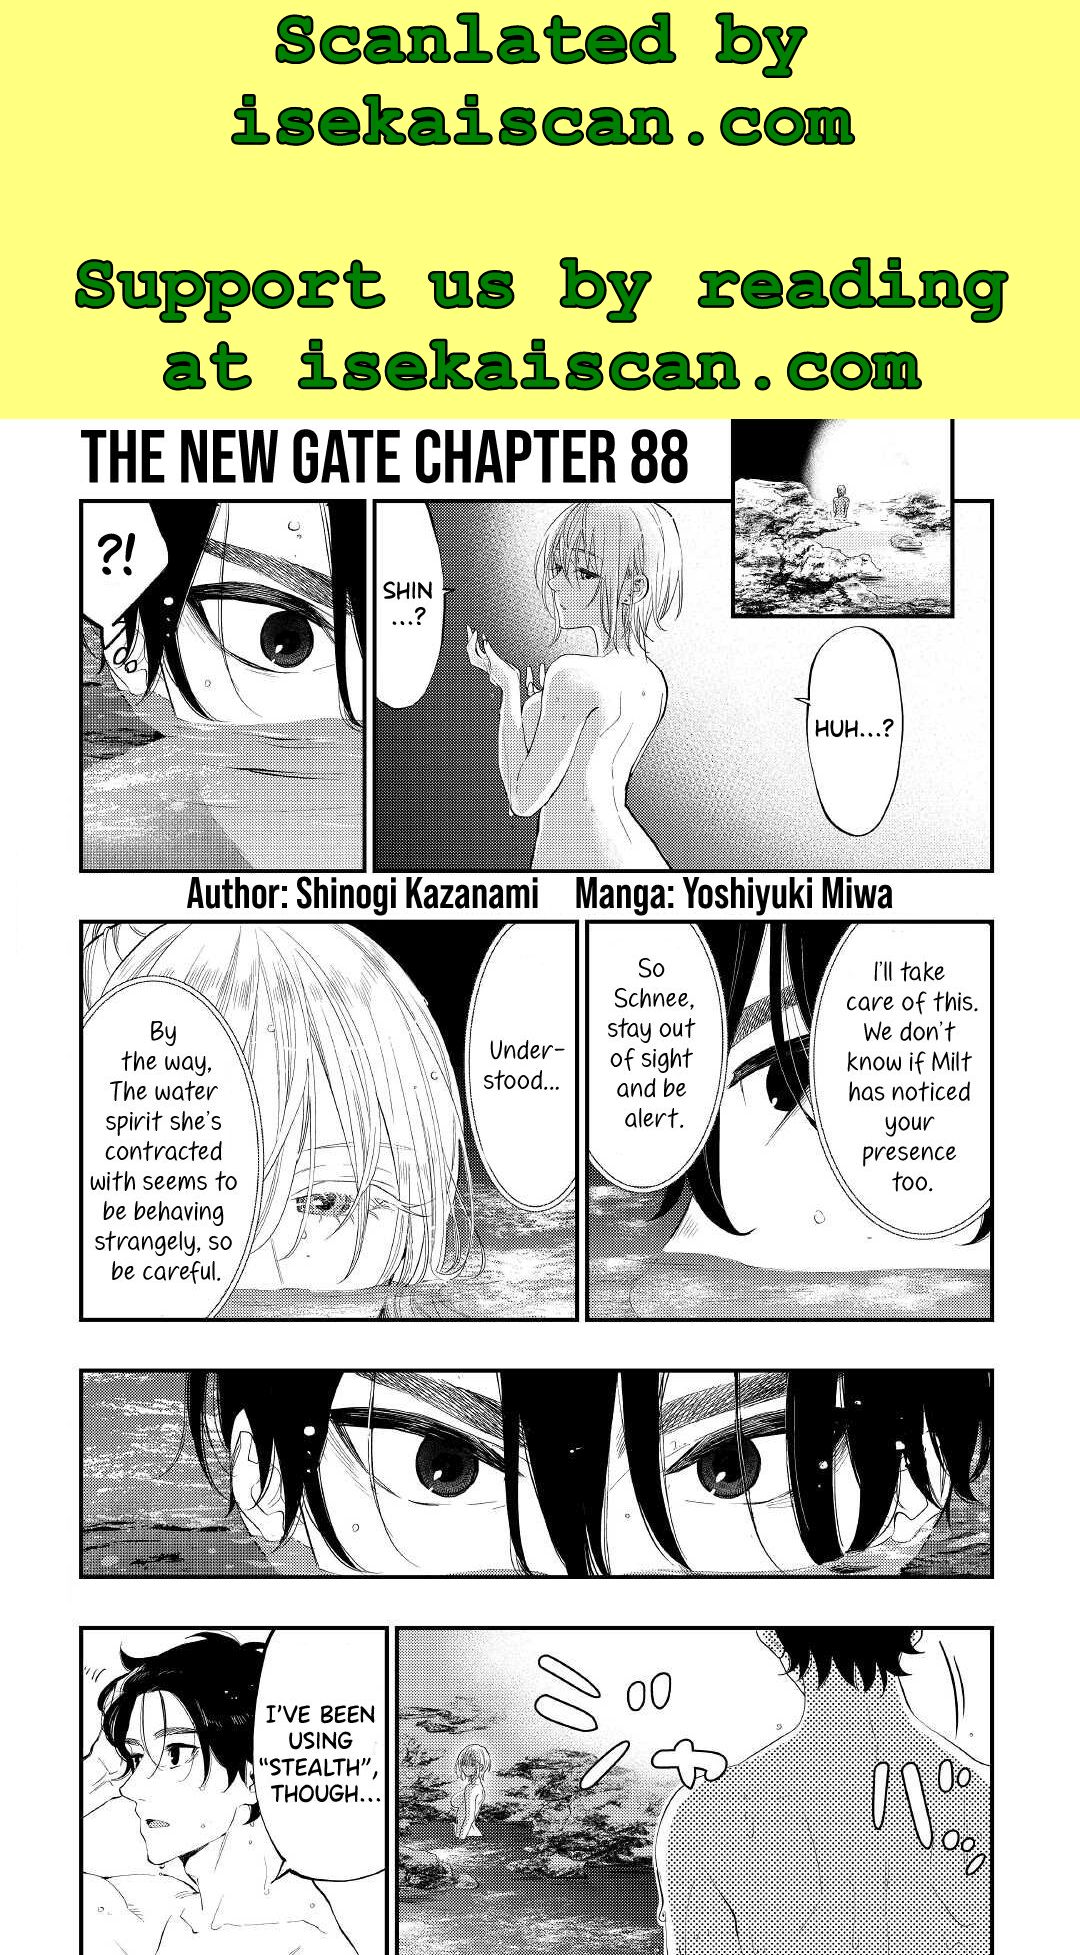 The New Gate - Page 1